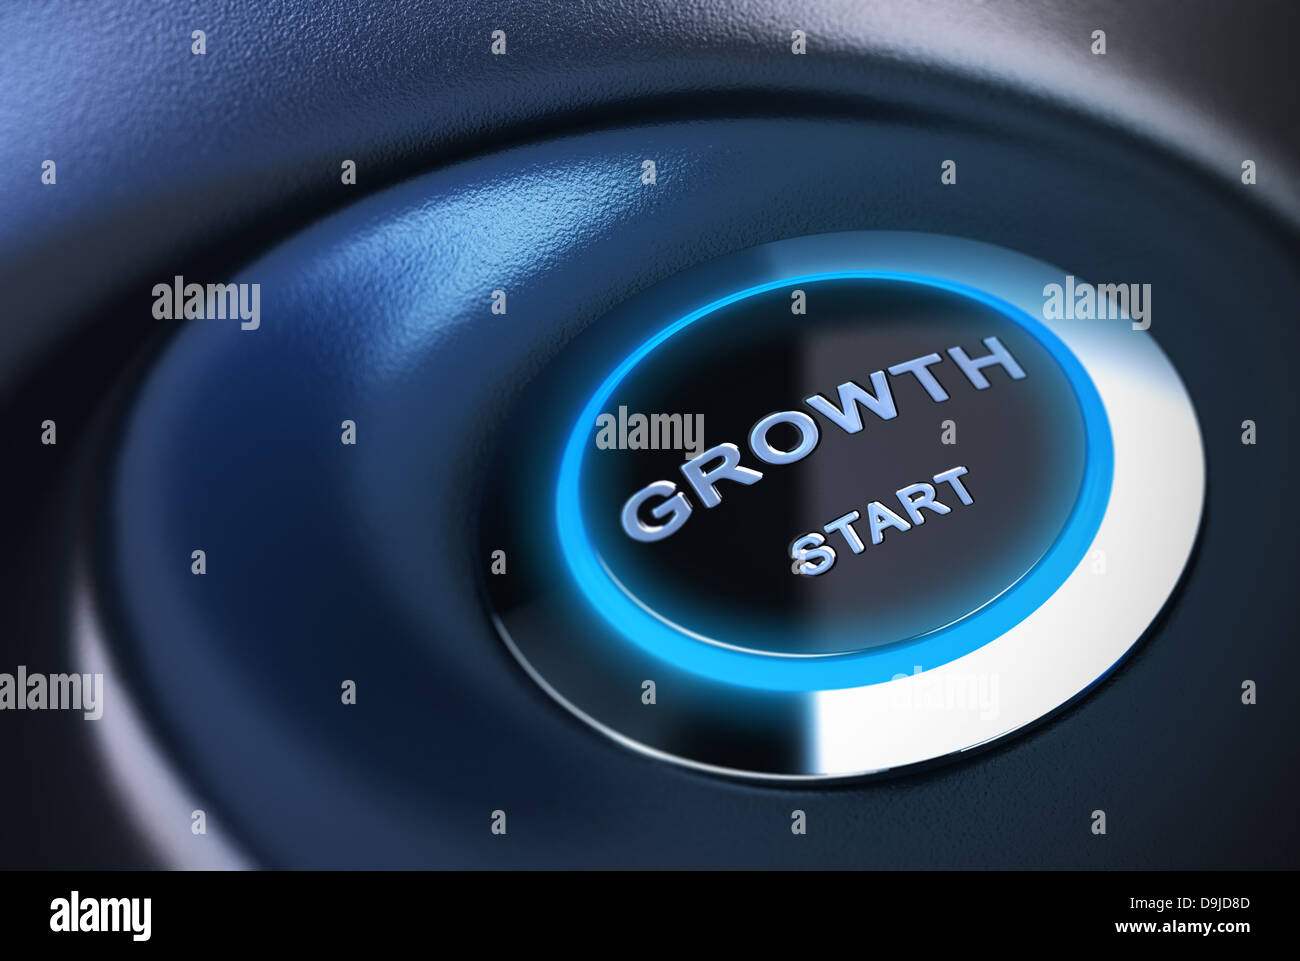 Growth start button, blue tones. 3D render suitable for restarting economy concept. Stock Photo